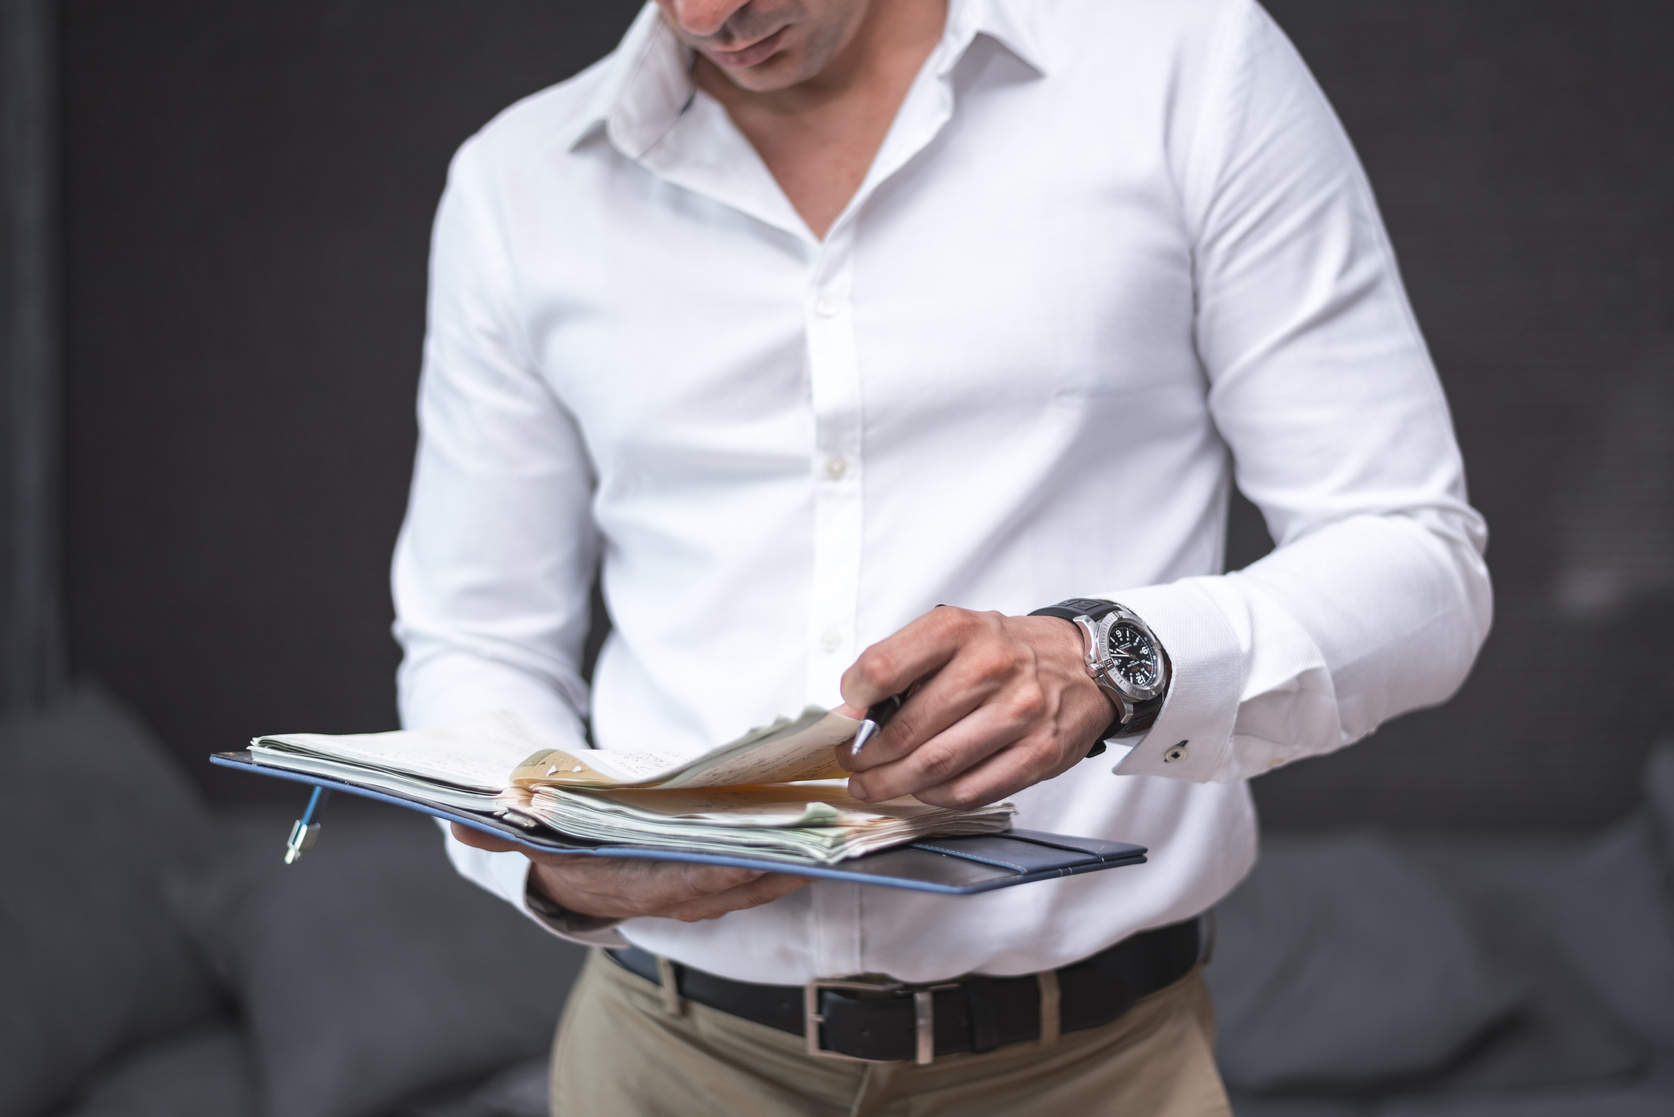 Man in White Dress Shirt Holding a Planner